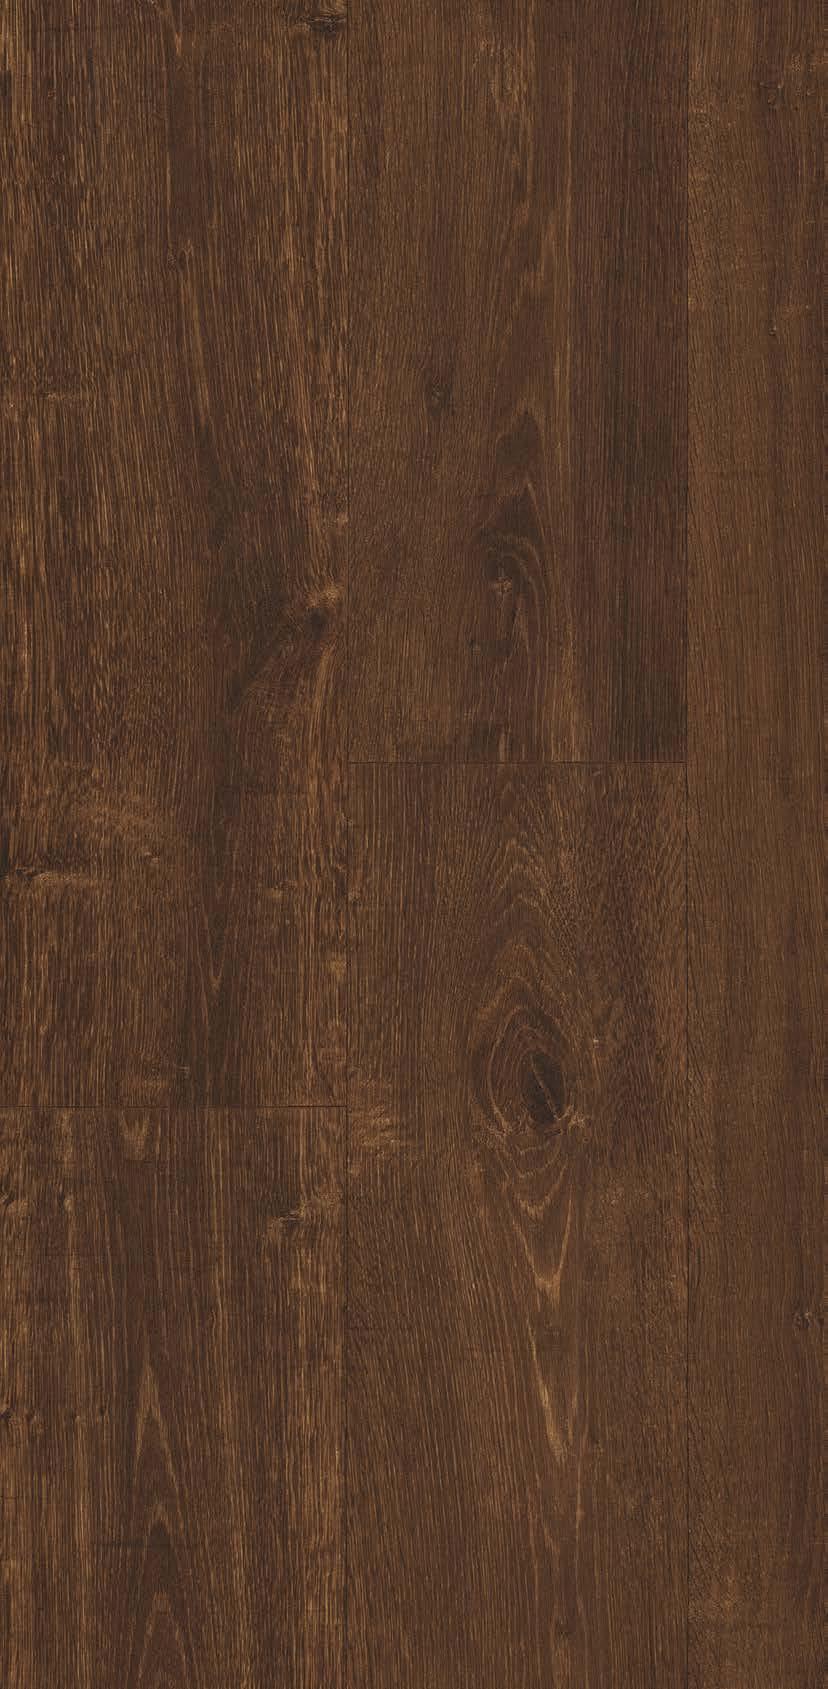 24 AGED OAK 3373 Plank size on sheet: 200mm (W) x 1500mm (L) With a real depth of